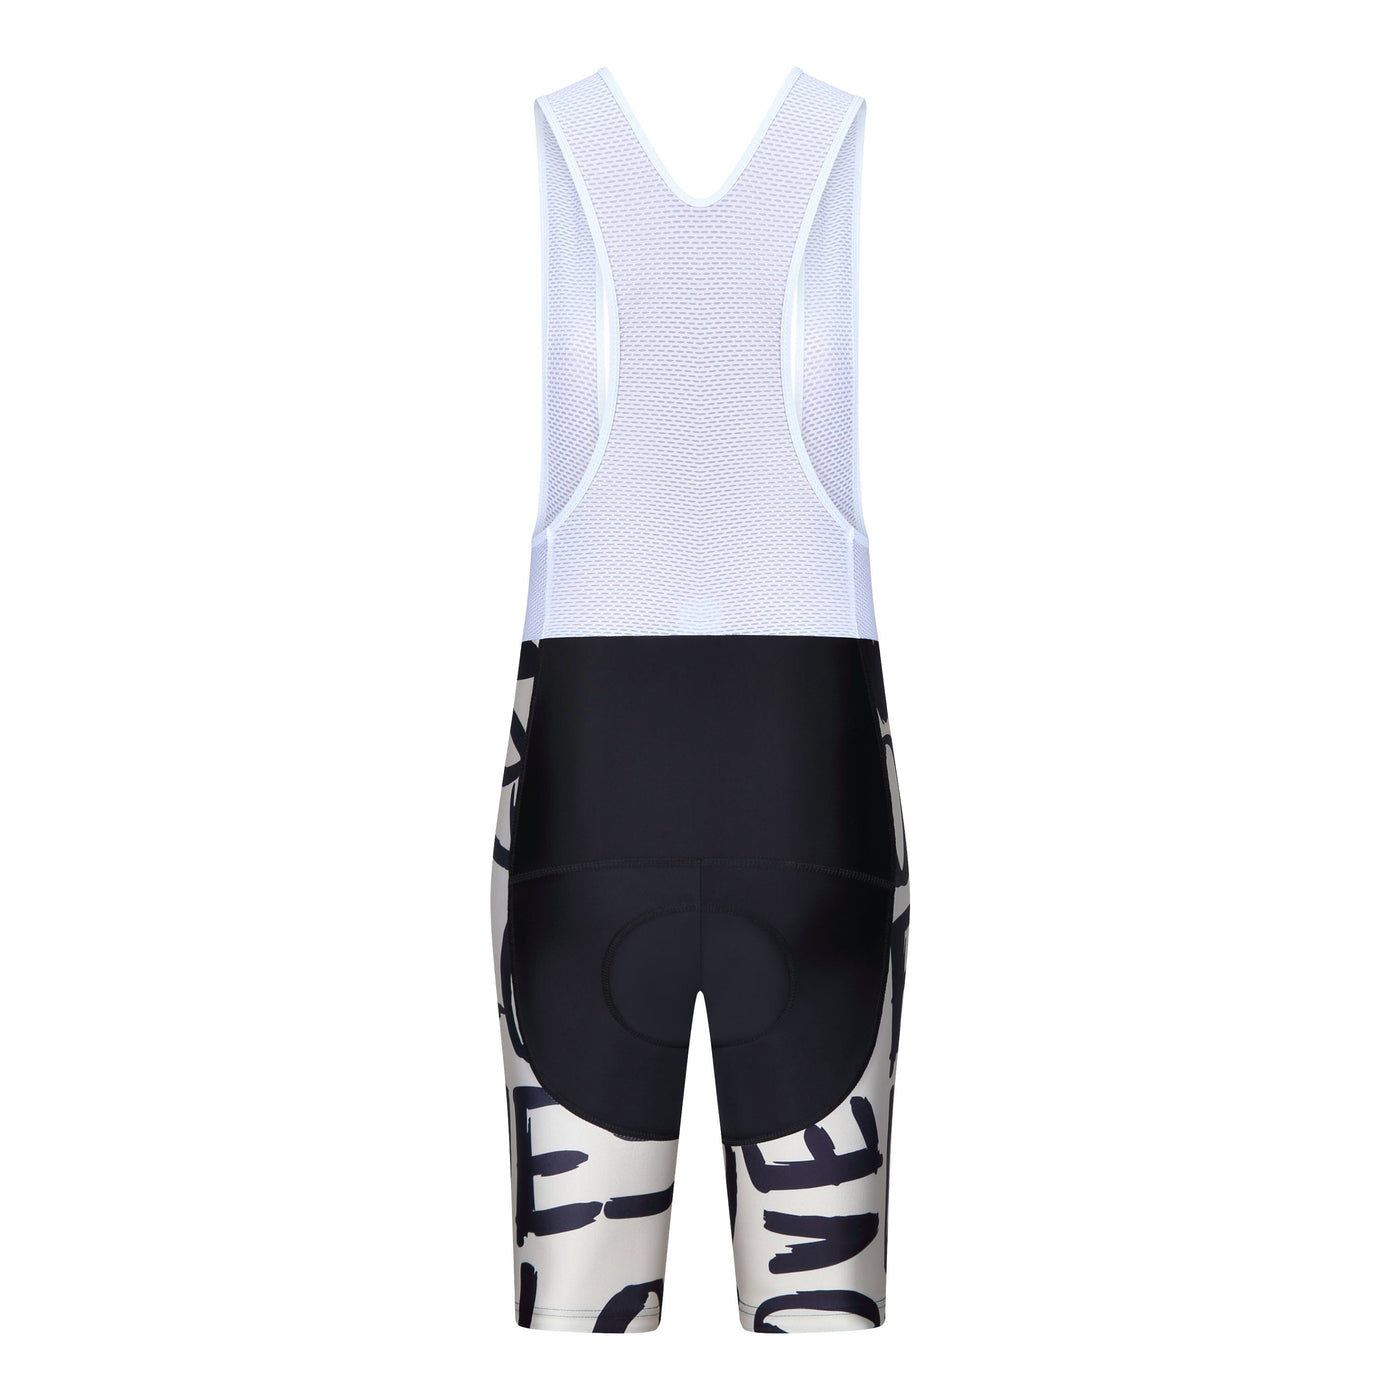 a bib shorts with a white and black print